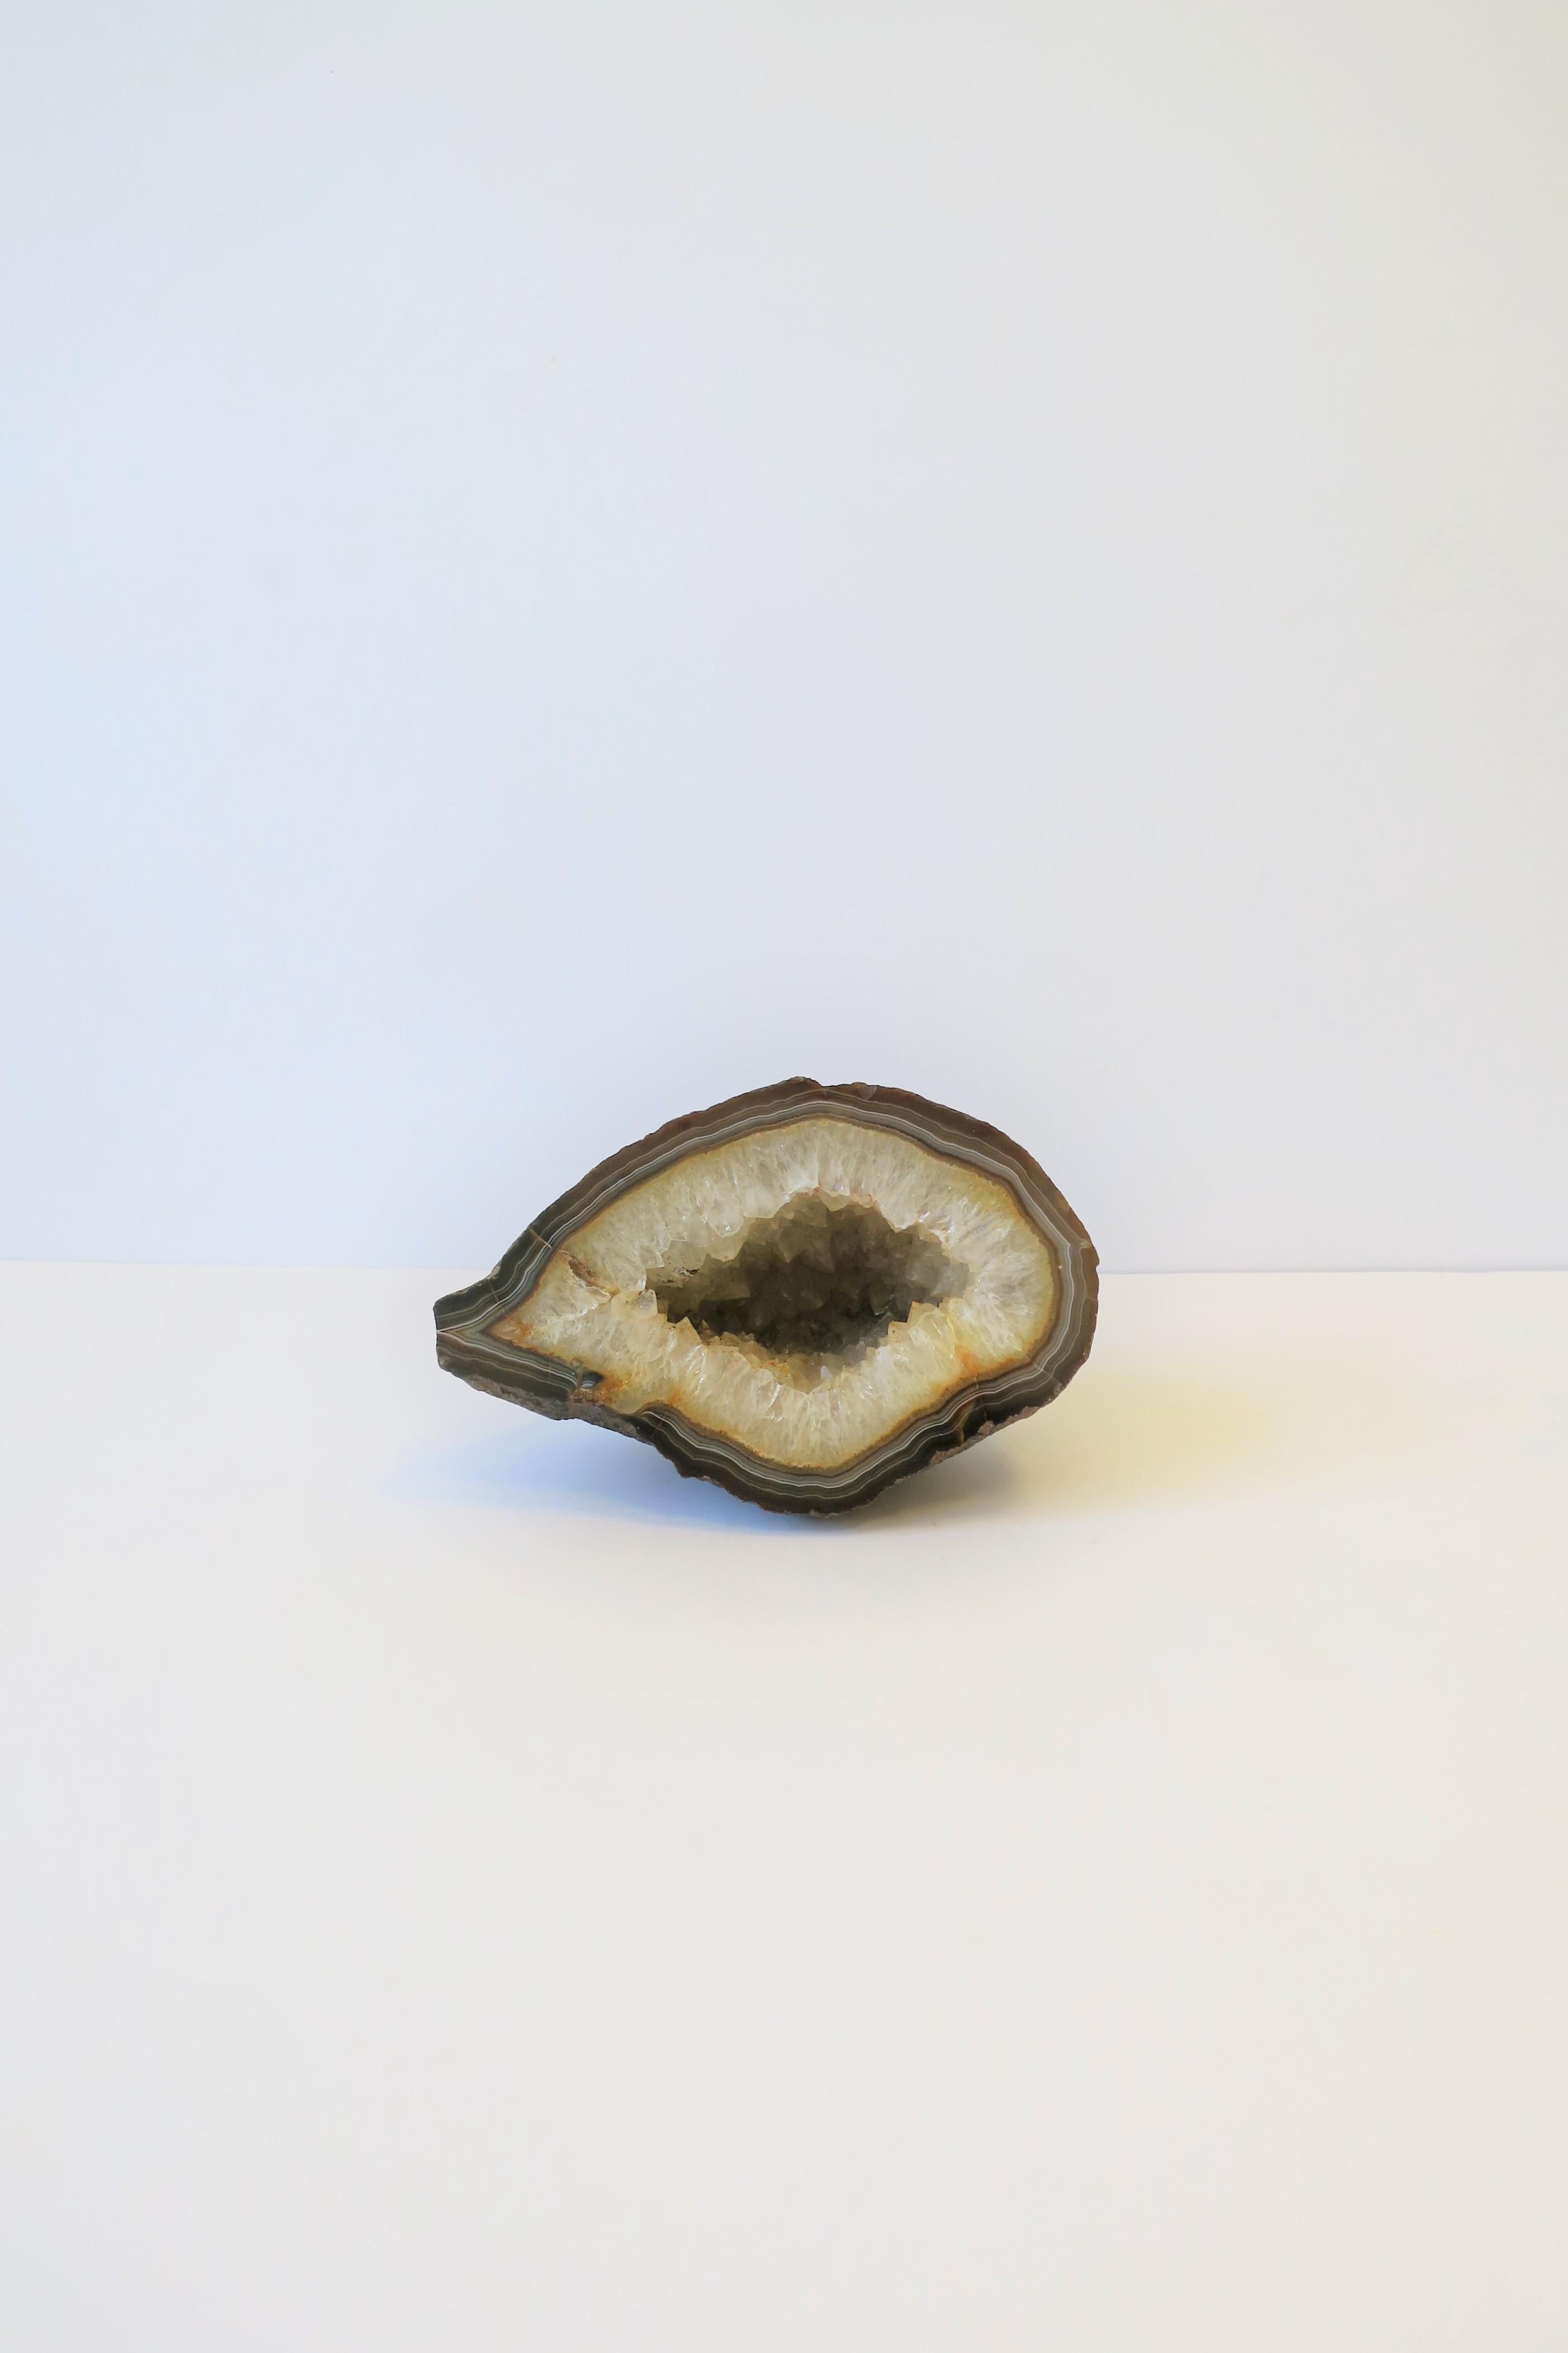 A beautiful and substantial white and brown agate geode natural specimen sculpture piece. Piece makes a great standalone decorative object, bookend, etc. 

Dimensions: 4.5